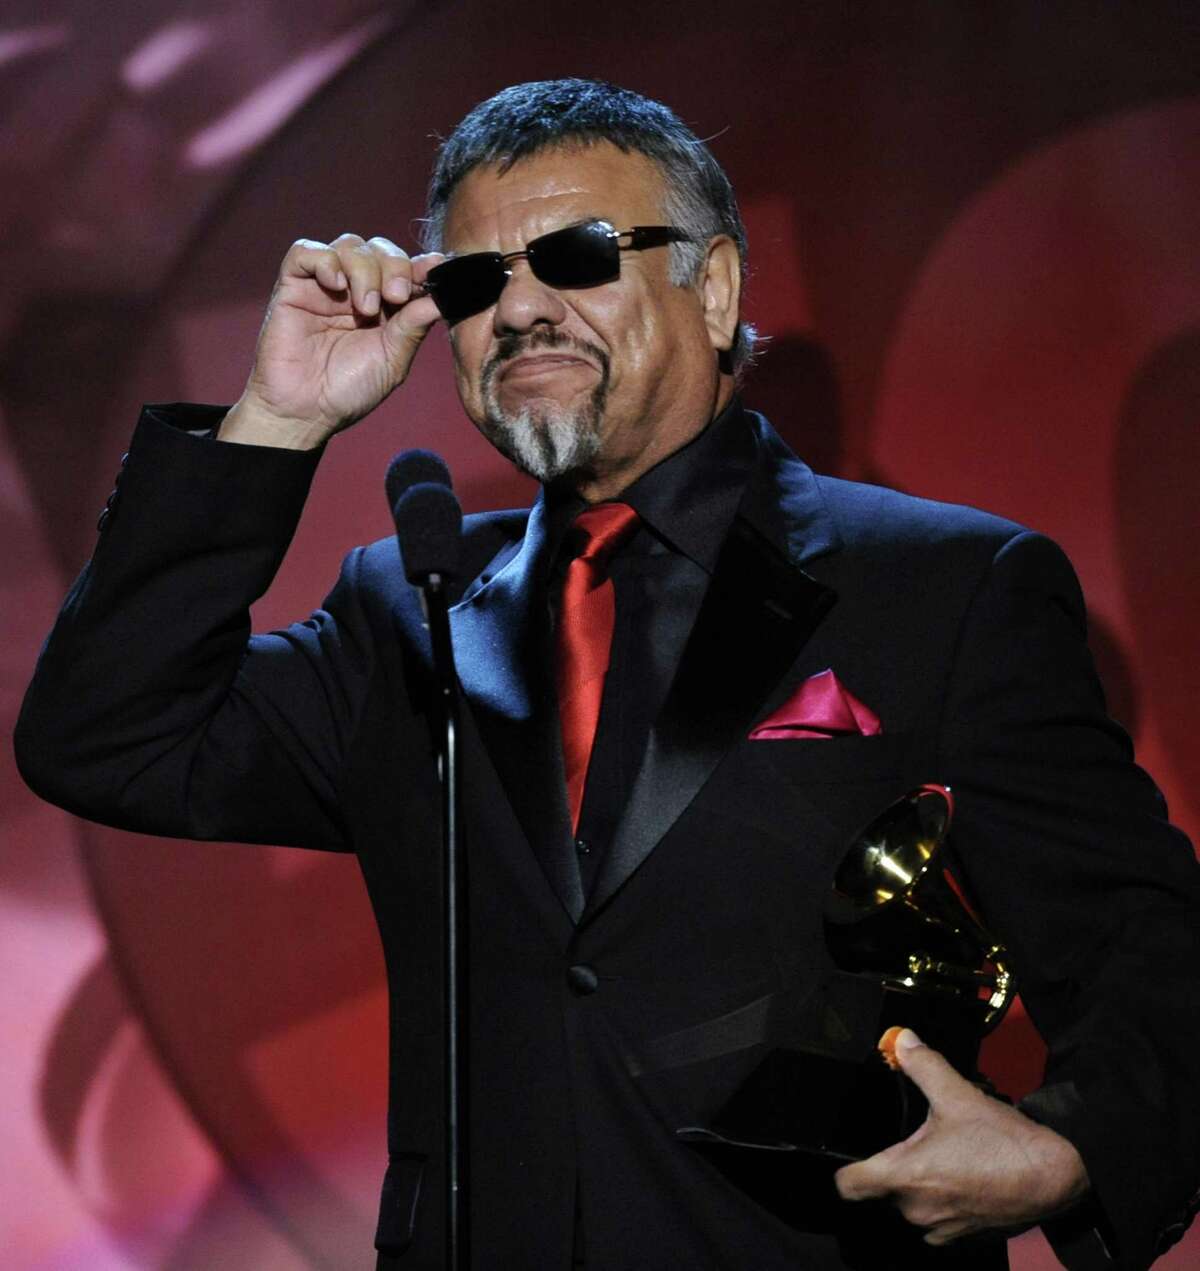 Little Joe, accepts the award for best Mexican/Mexican-American album for Before The Next Teardrop Falls at the 50th Annual Grammy Awards on Sunday, Feb. 10, 2008, in Los Angeles. (AP Photo/Kevork Djansezian)